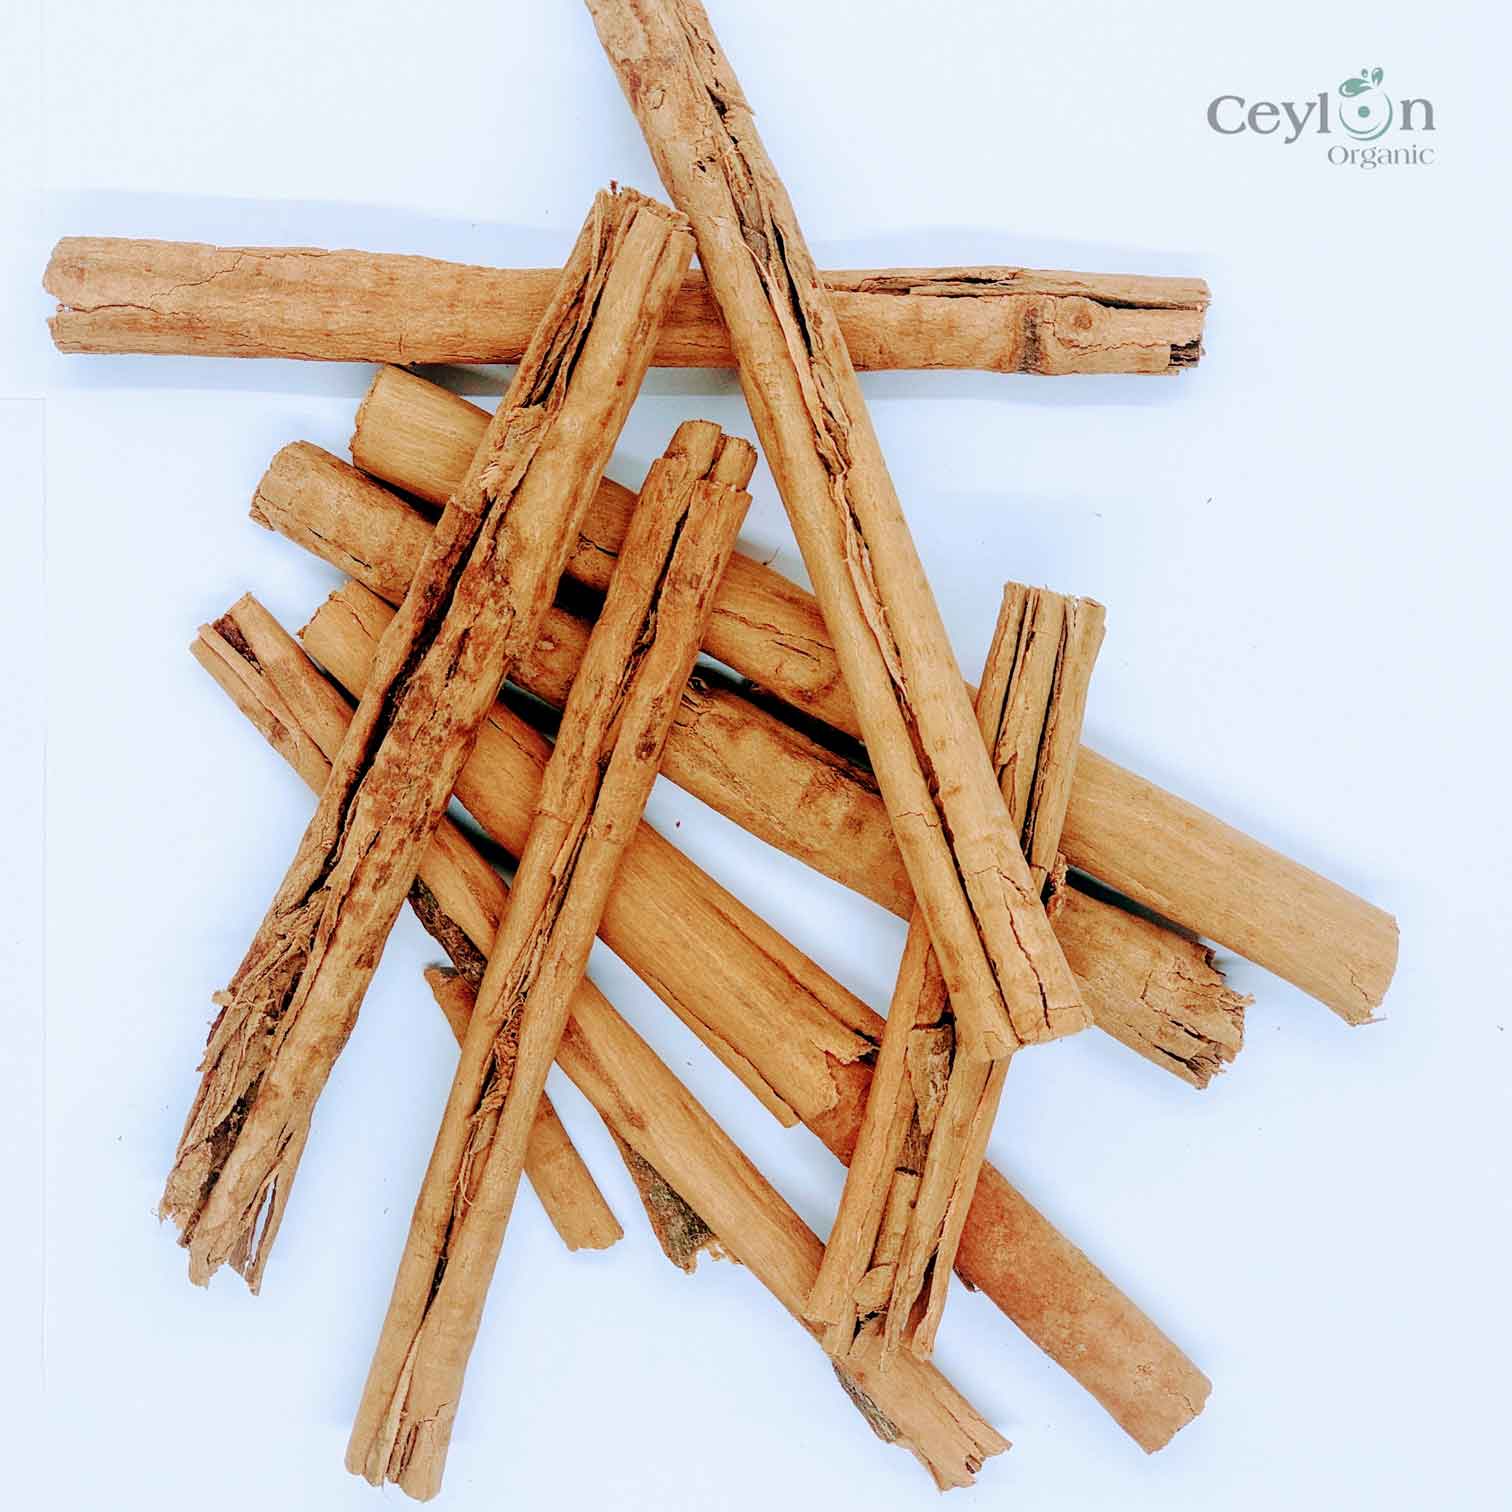 2kg+ Cinnamon Sticks - The Perfect Spice for Baking, Cooking, and Tea | Ceylon Organic-6